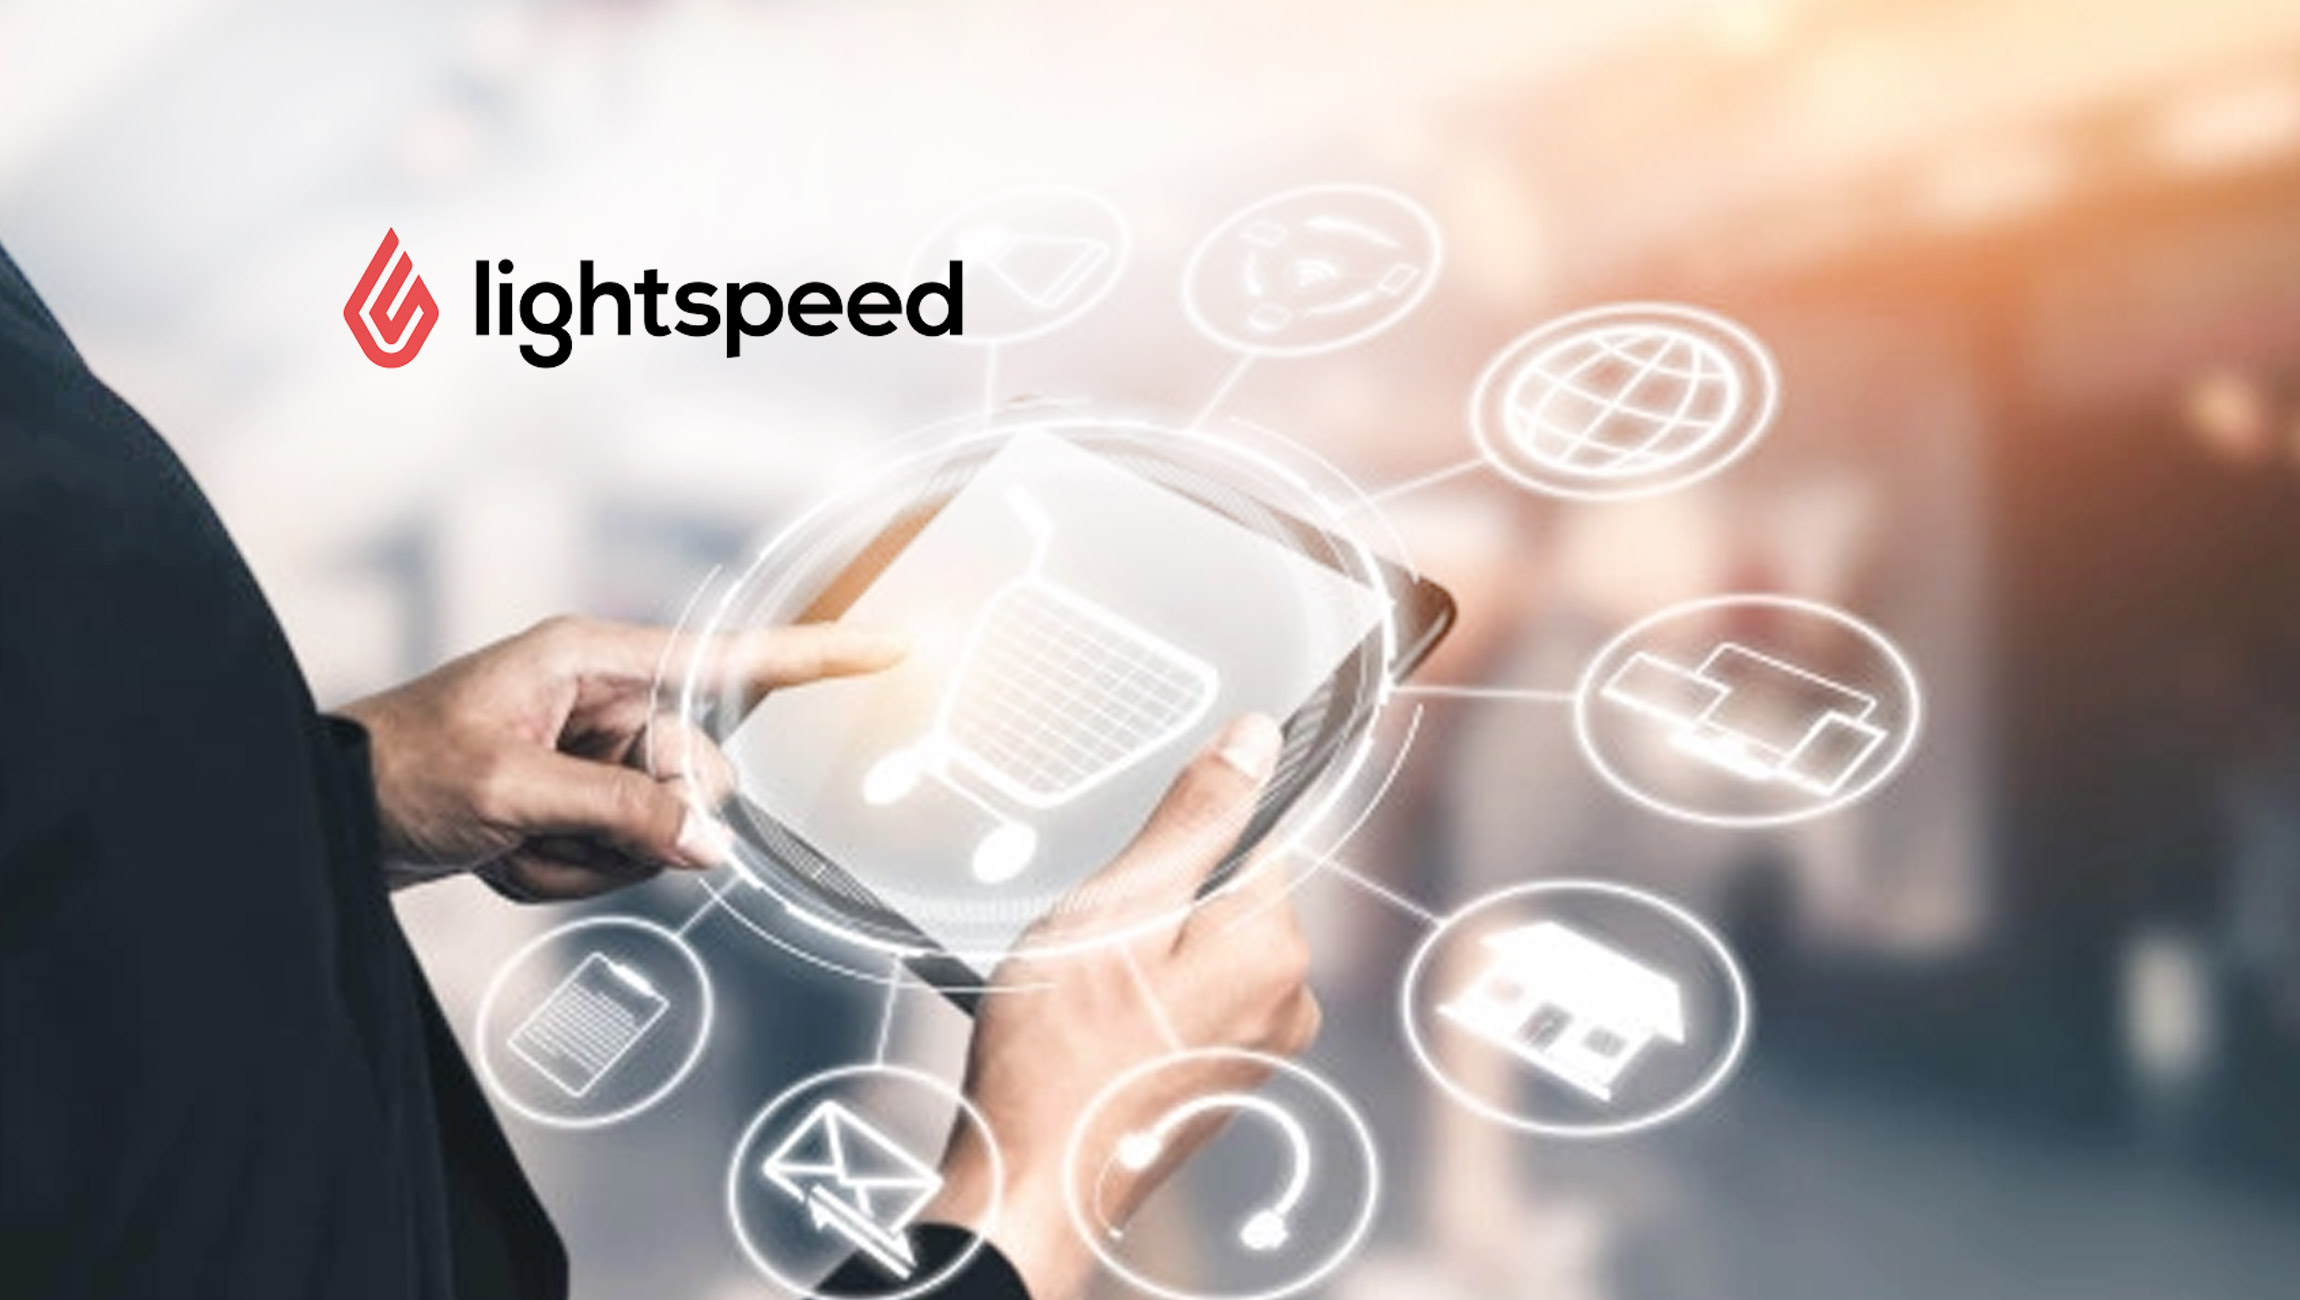 Lightspeed and OpenTable Help Restaurants Drive Improved Efficiencies as Systems Integration Partnership Extends to North America